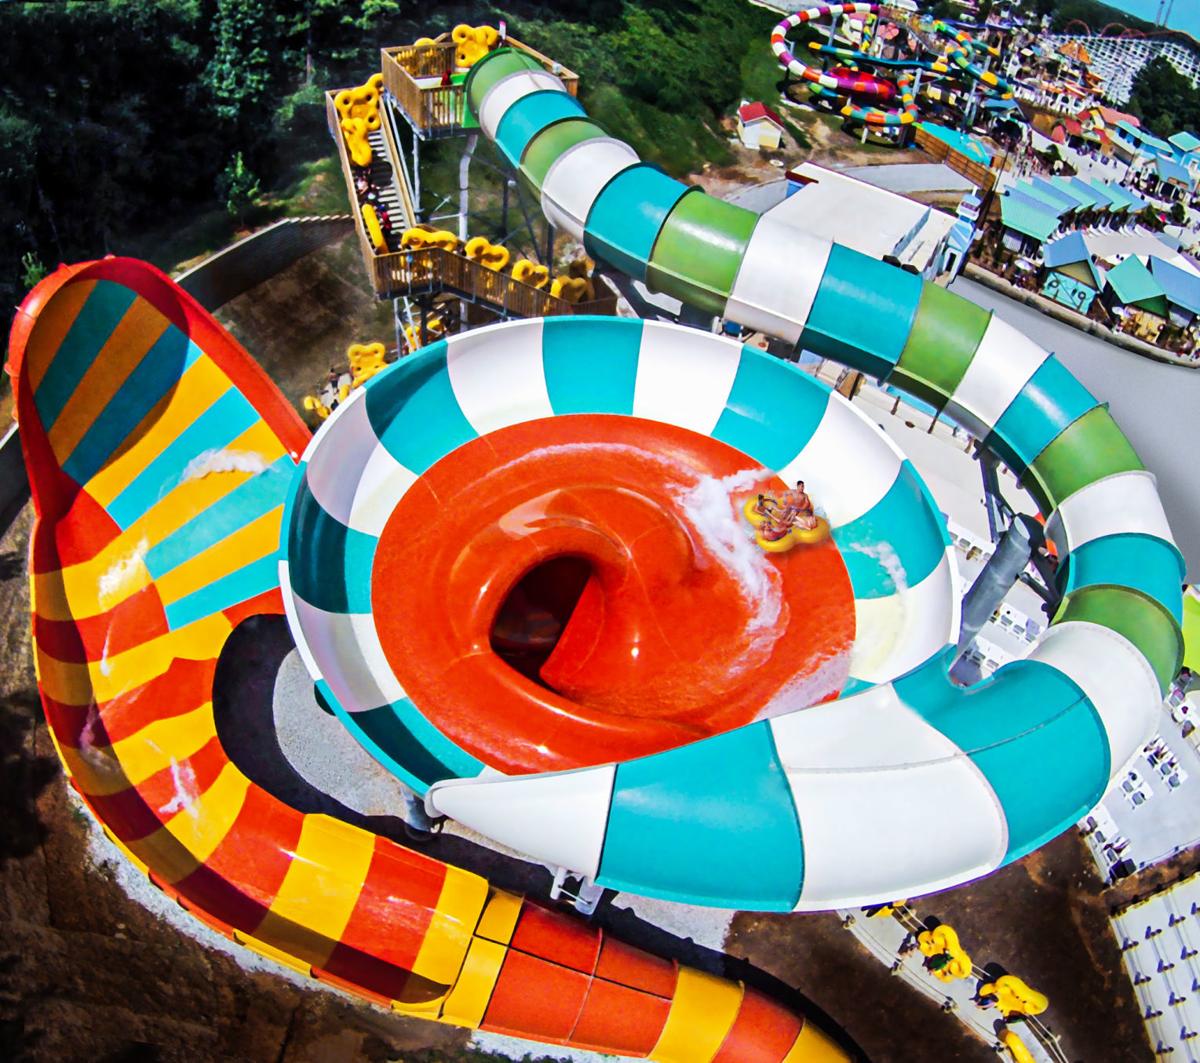 Water slide injury at Six Flags St. Louis highlights lax regulation | Political Fix | 0